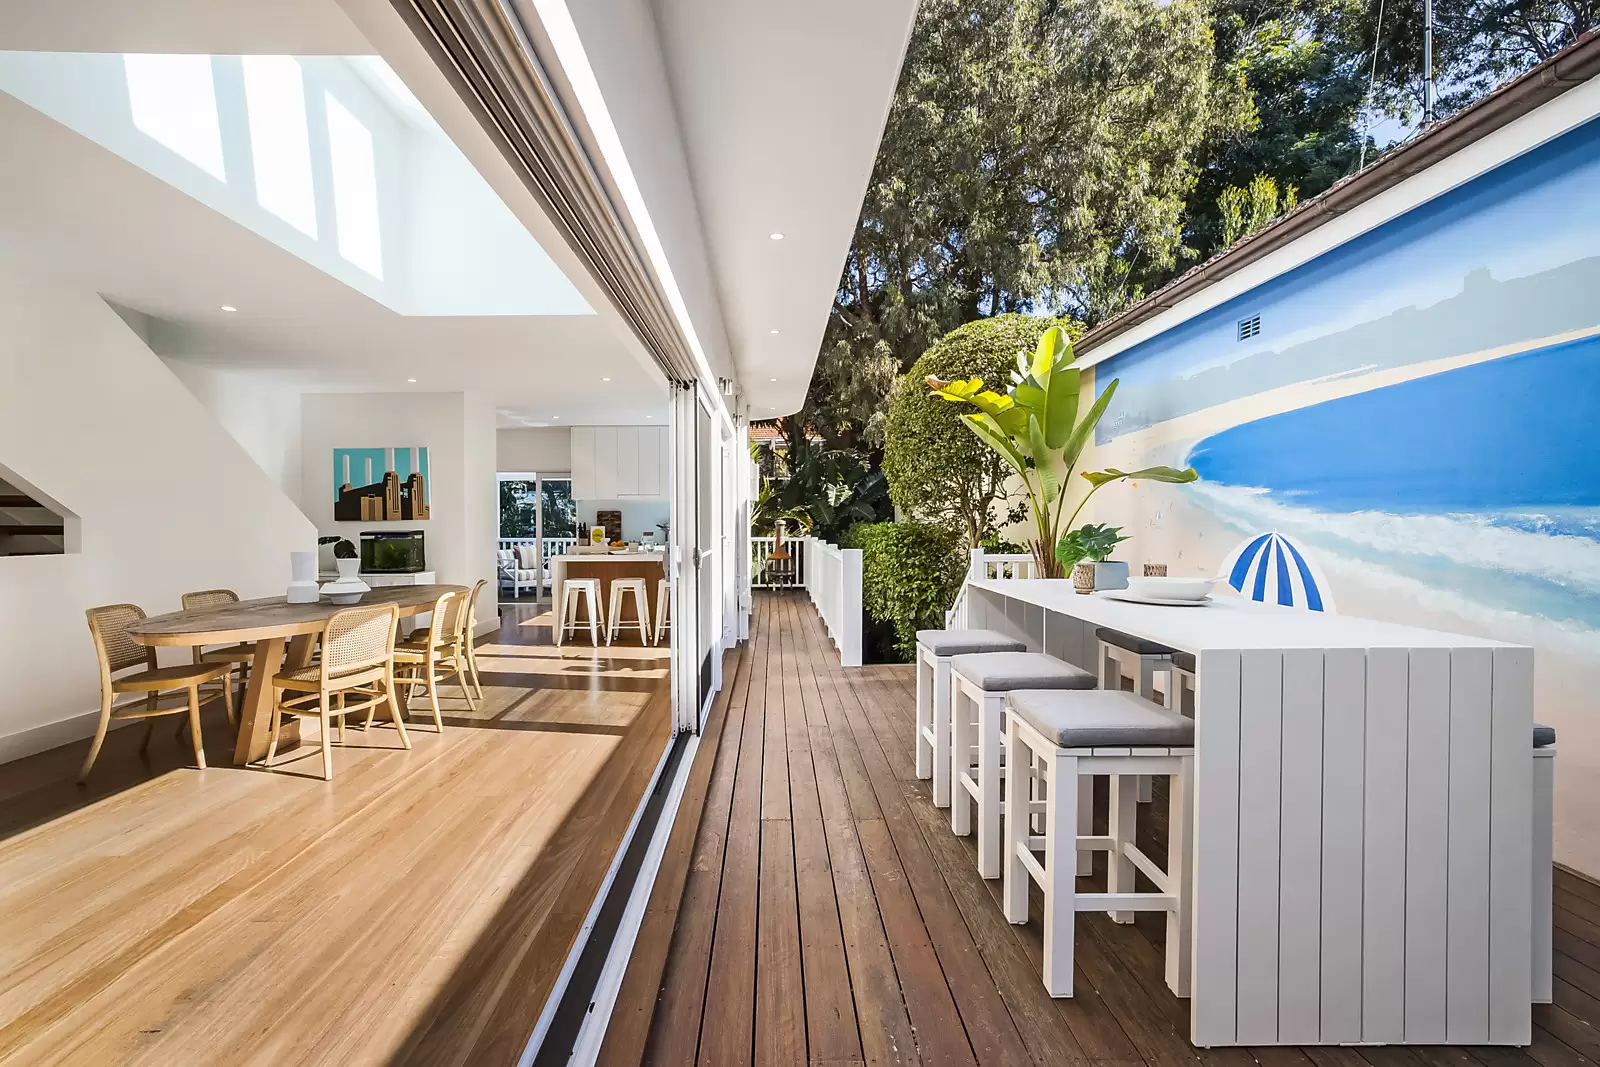 Photo #3: 2 Bay Street, Coogee - Auction by Sydney Sotheby's International Realty